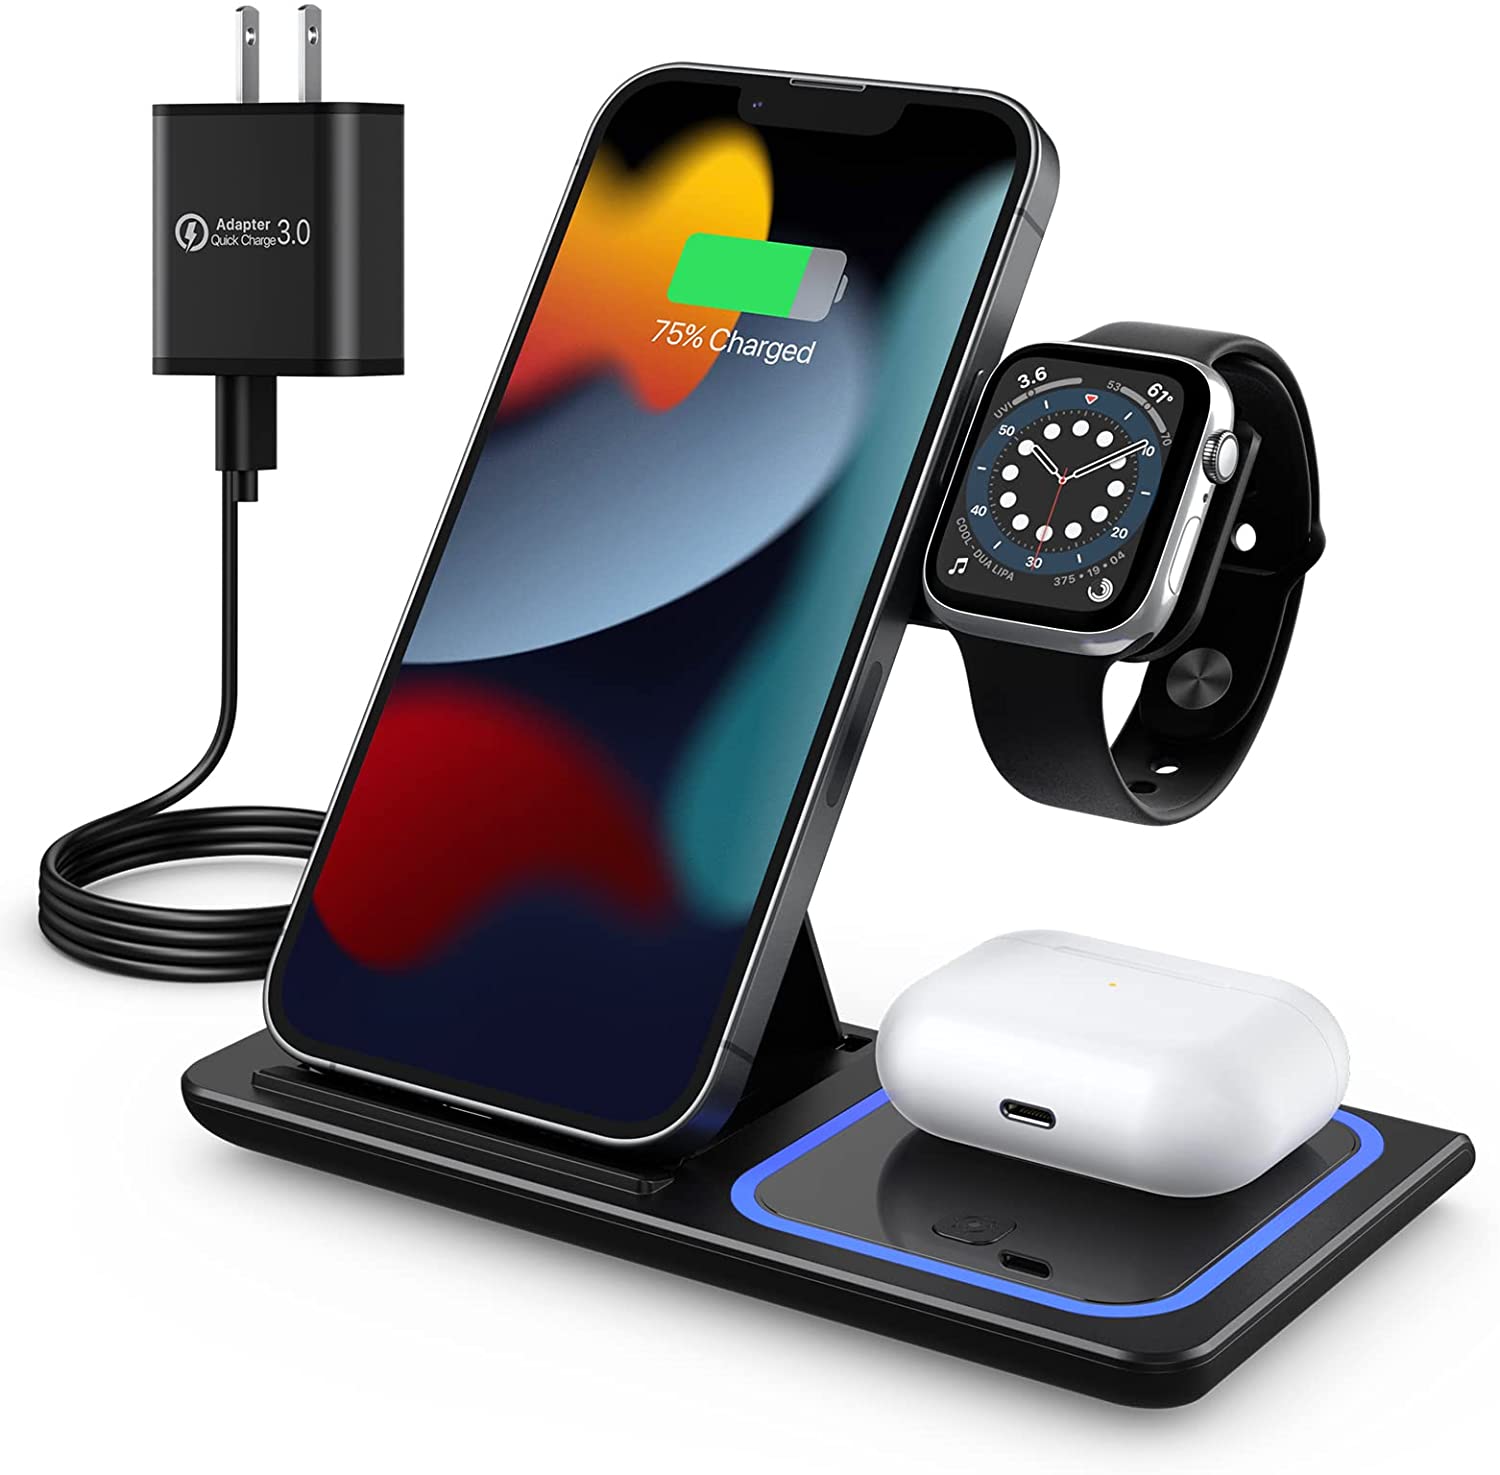 Wireless Charging Station, 3 in 1 Foldable Wireless Charger Stand, Wireless Charging Stand for iPhone 13/12/12 Pro/12 Pro Max/11/XS Max/XS/XR/X/8P, Airpods 2/pro, Apple Watch, and Qi-Certified Phones